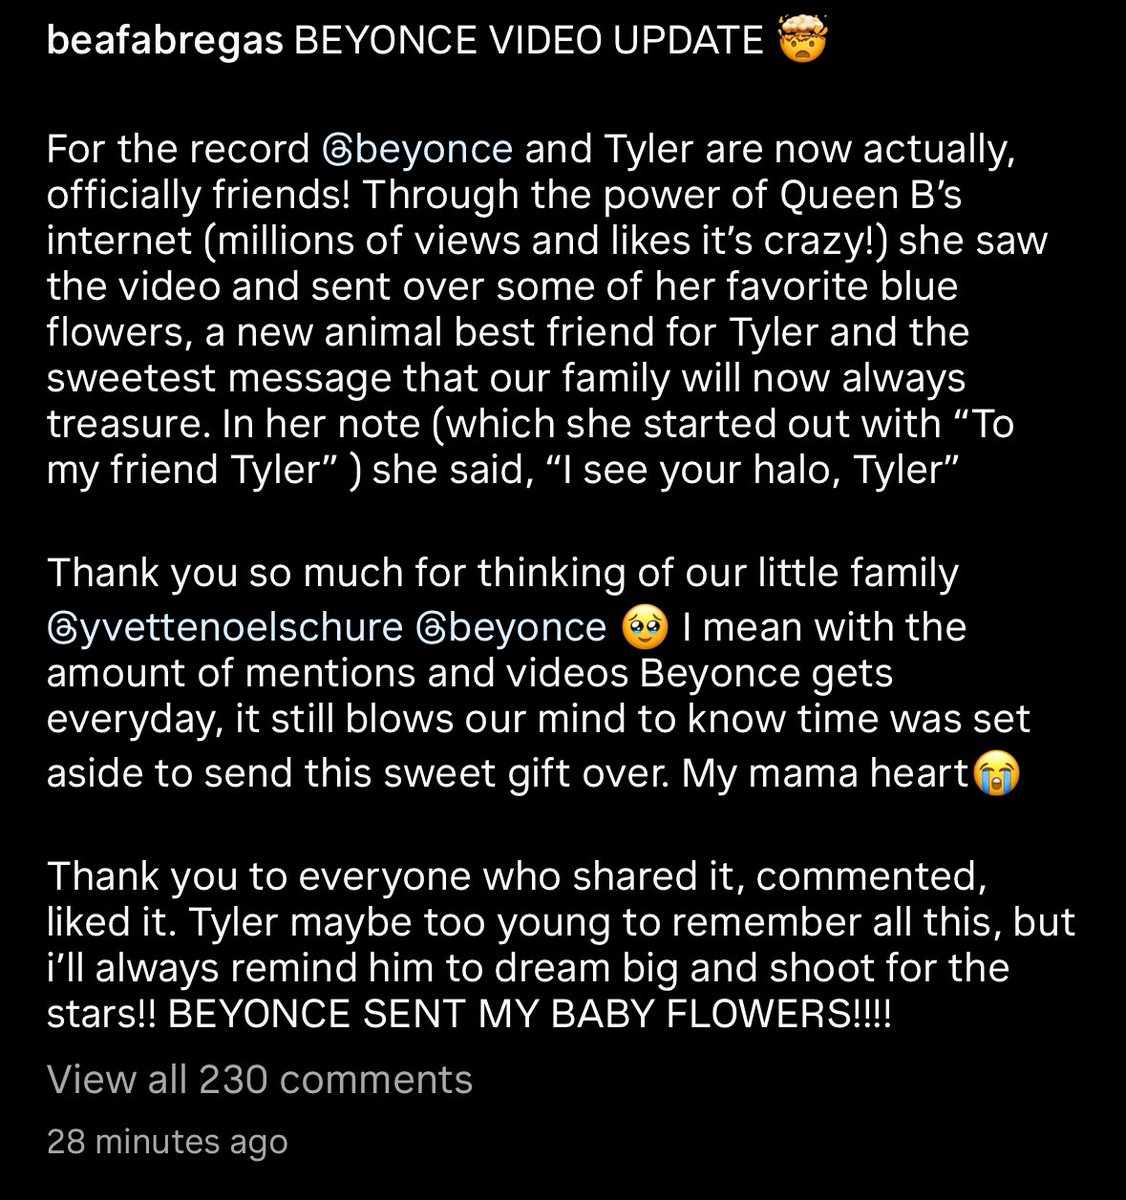 UPDATE: Beyoncé sent flowers and toys to Tyler 😭❤️